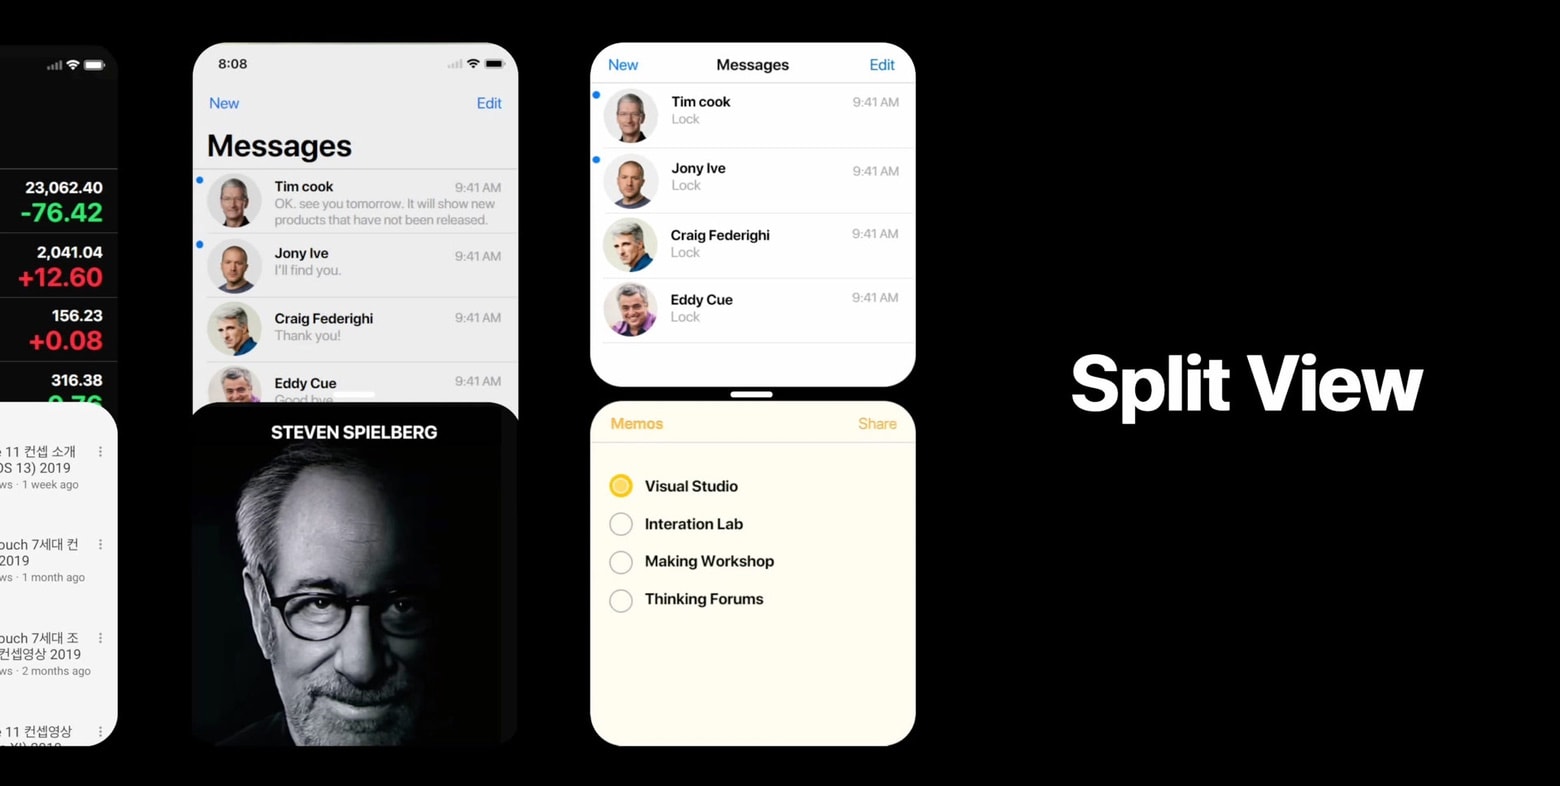 An iOS 13 concept suggests working with two apps at once on an iPhone screen.